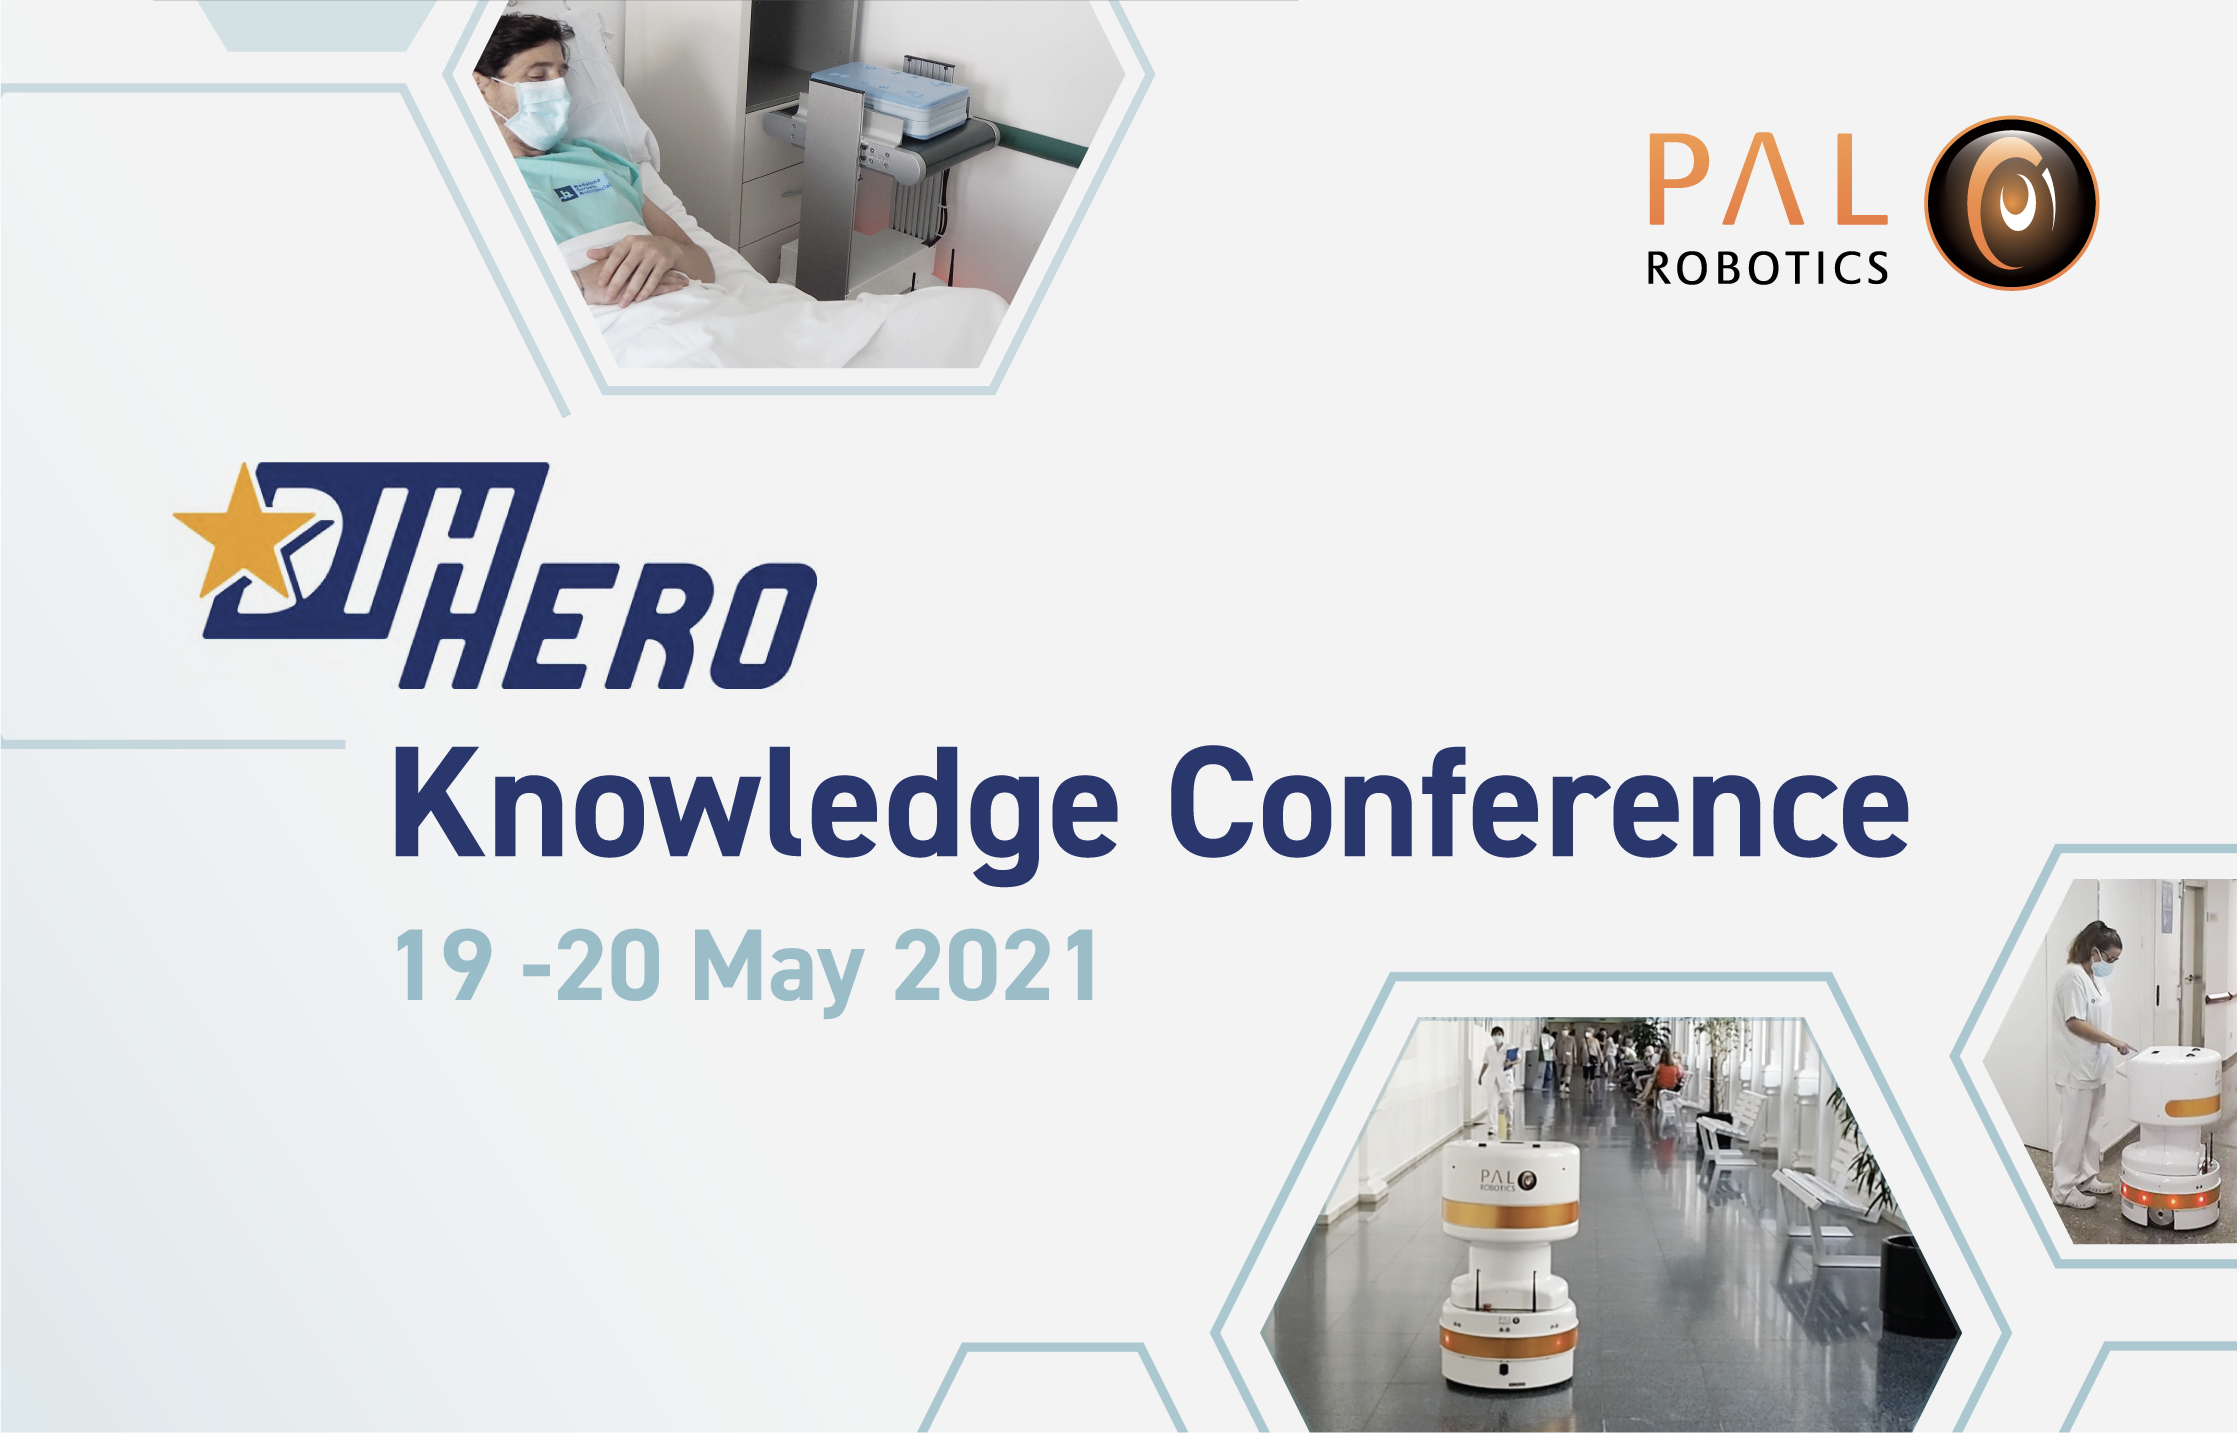 DIH-HERO Knowledge Conference 2021